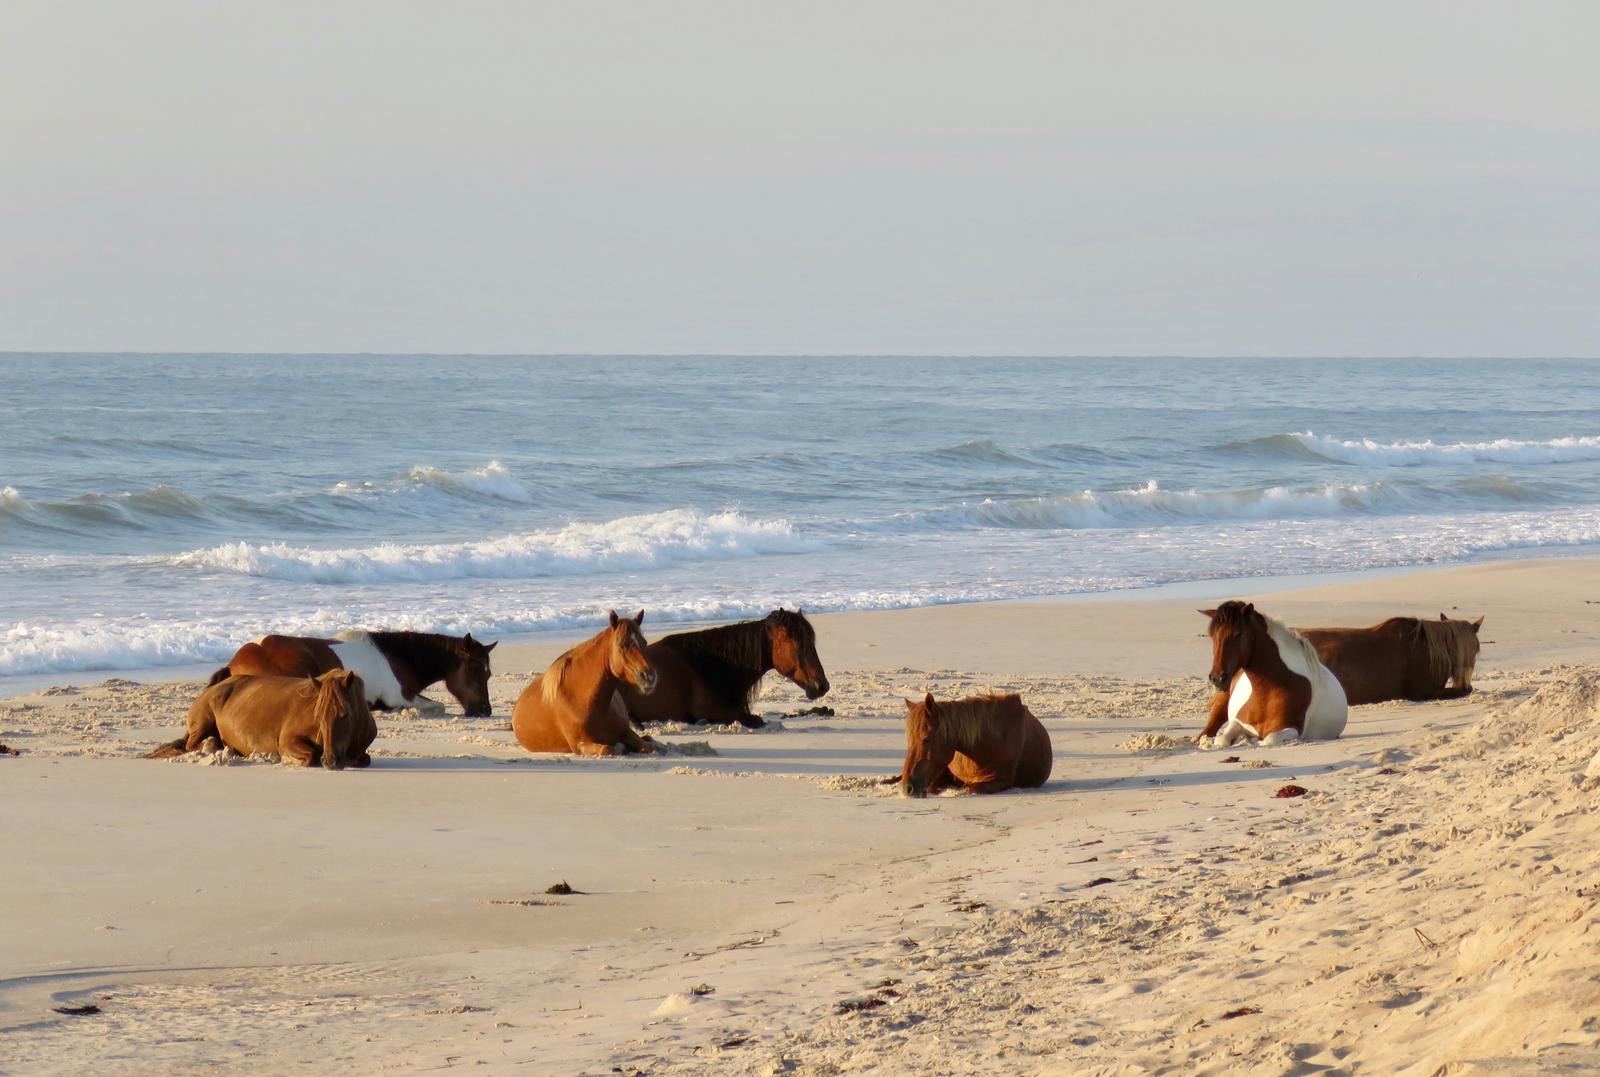 A band of horses rest on the beachWild horses often seek respite from the heat and biting insects by resting on the beach.